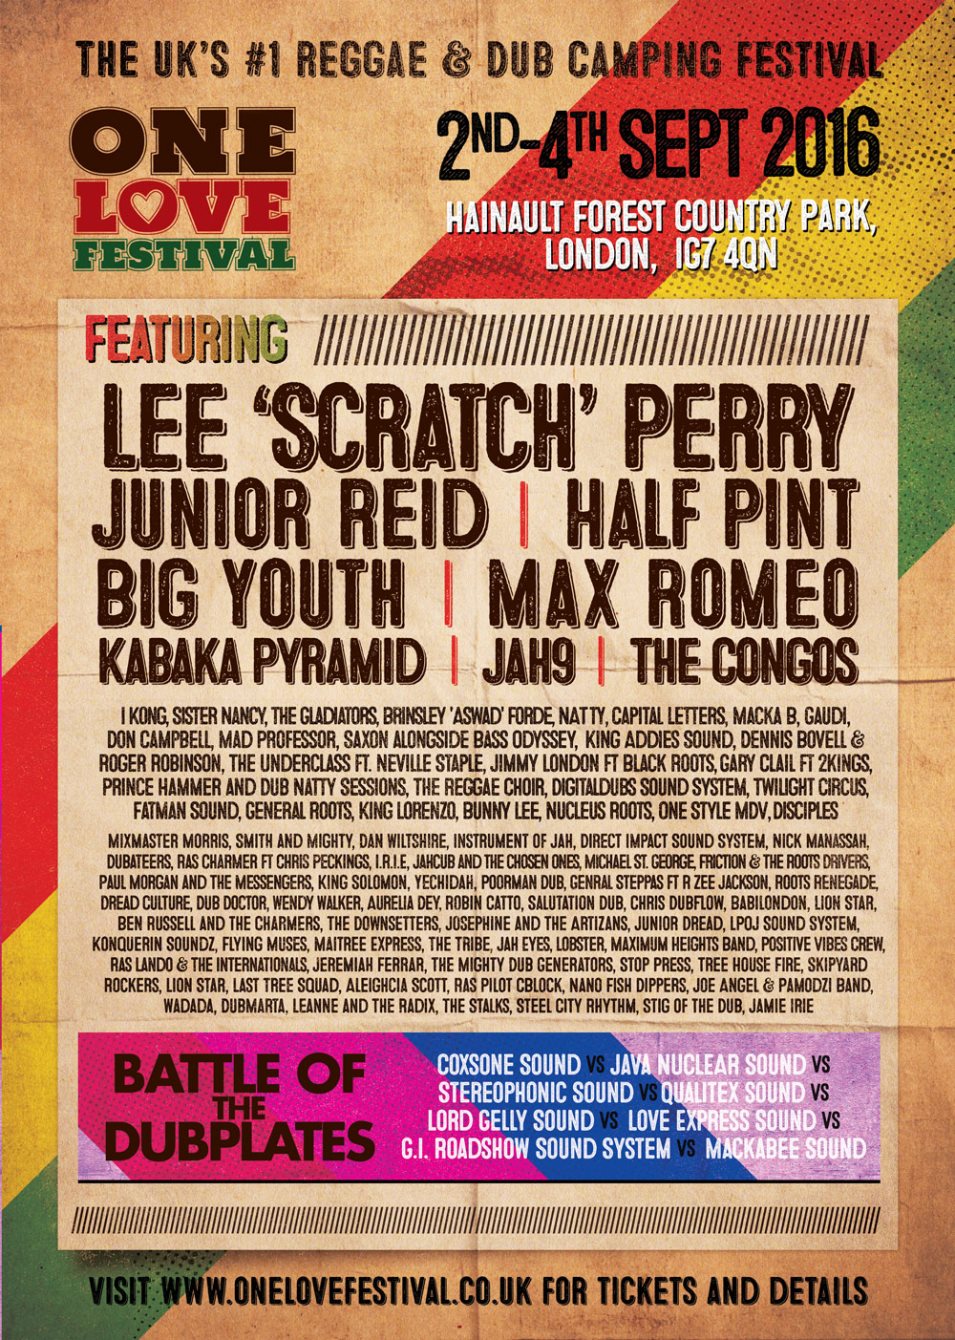 One Love Festival at Hainault Forest Country Park, London